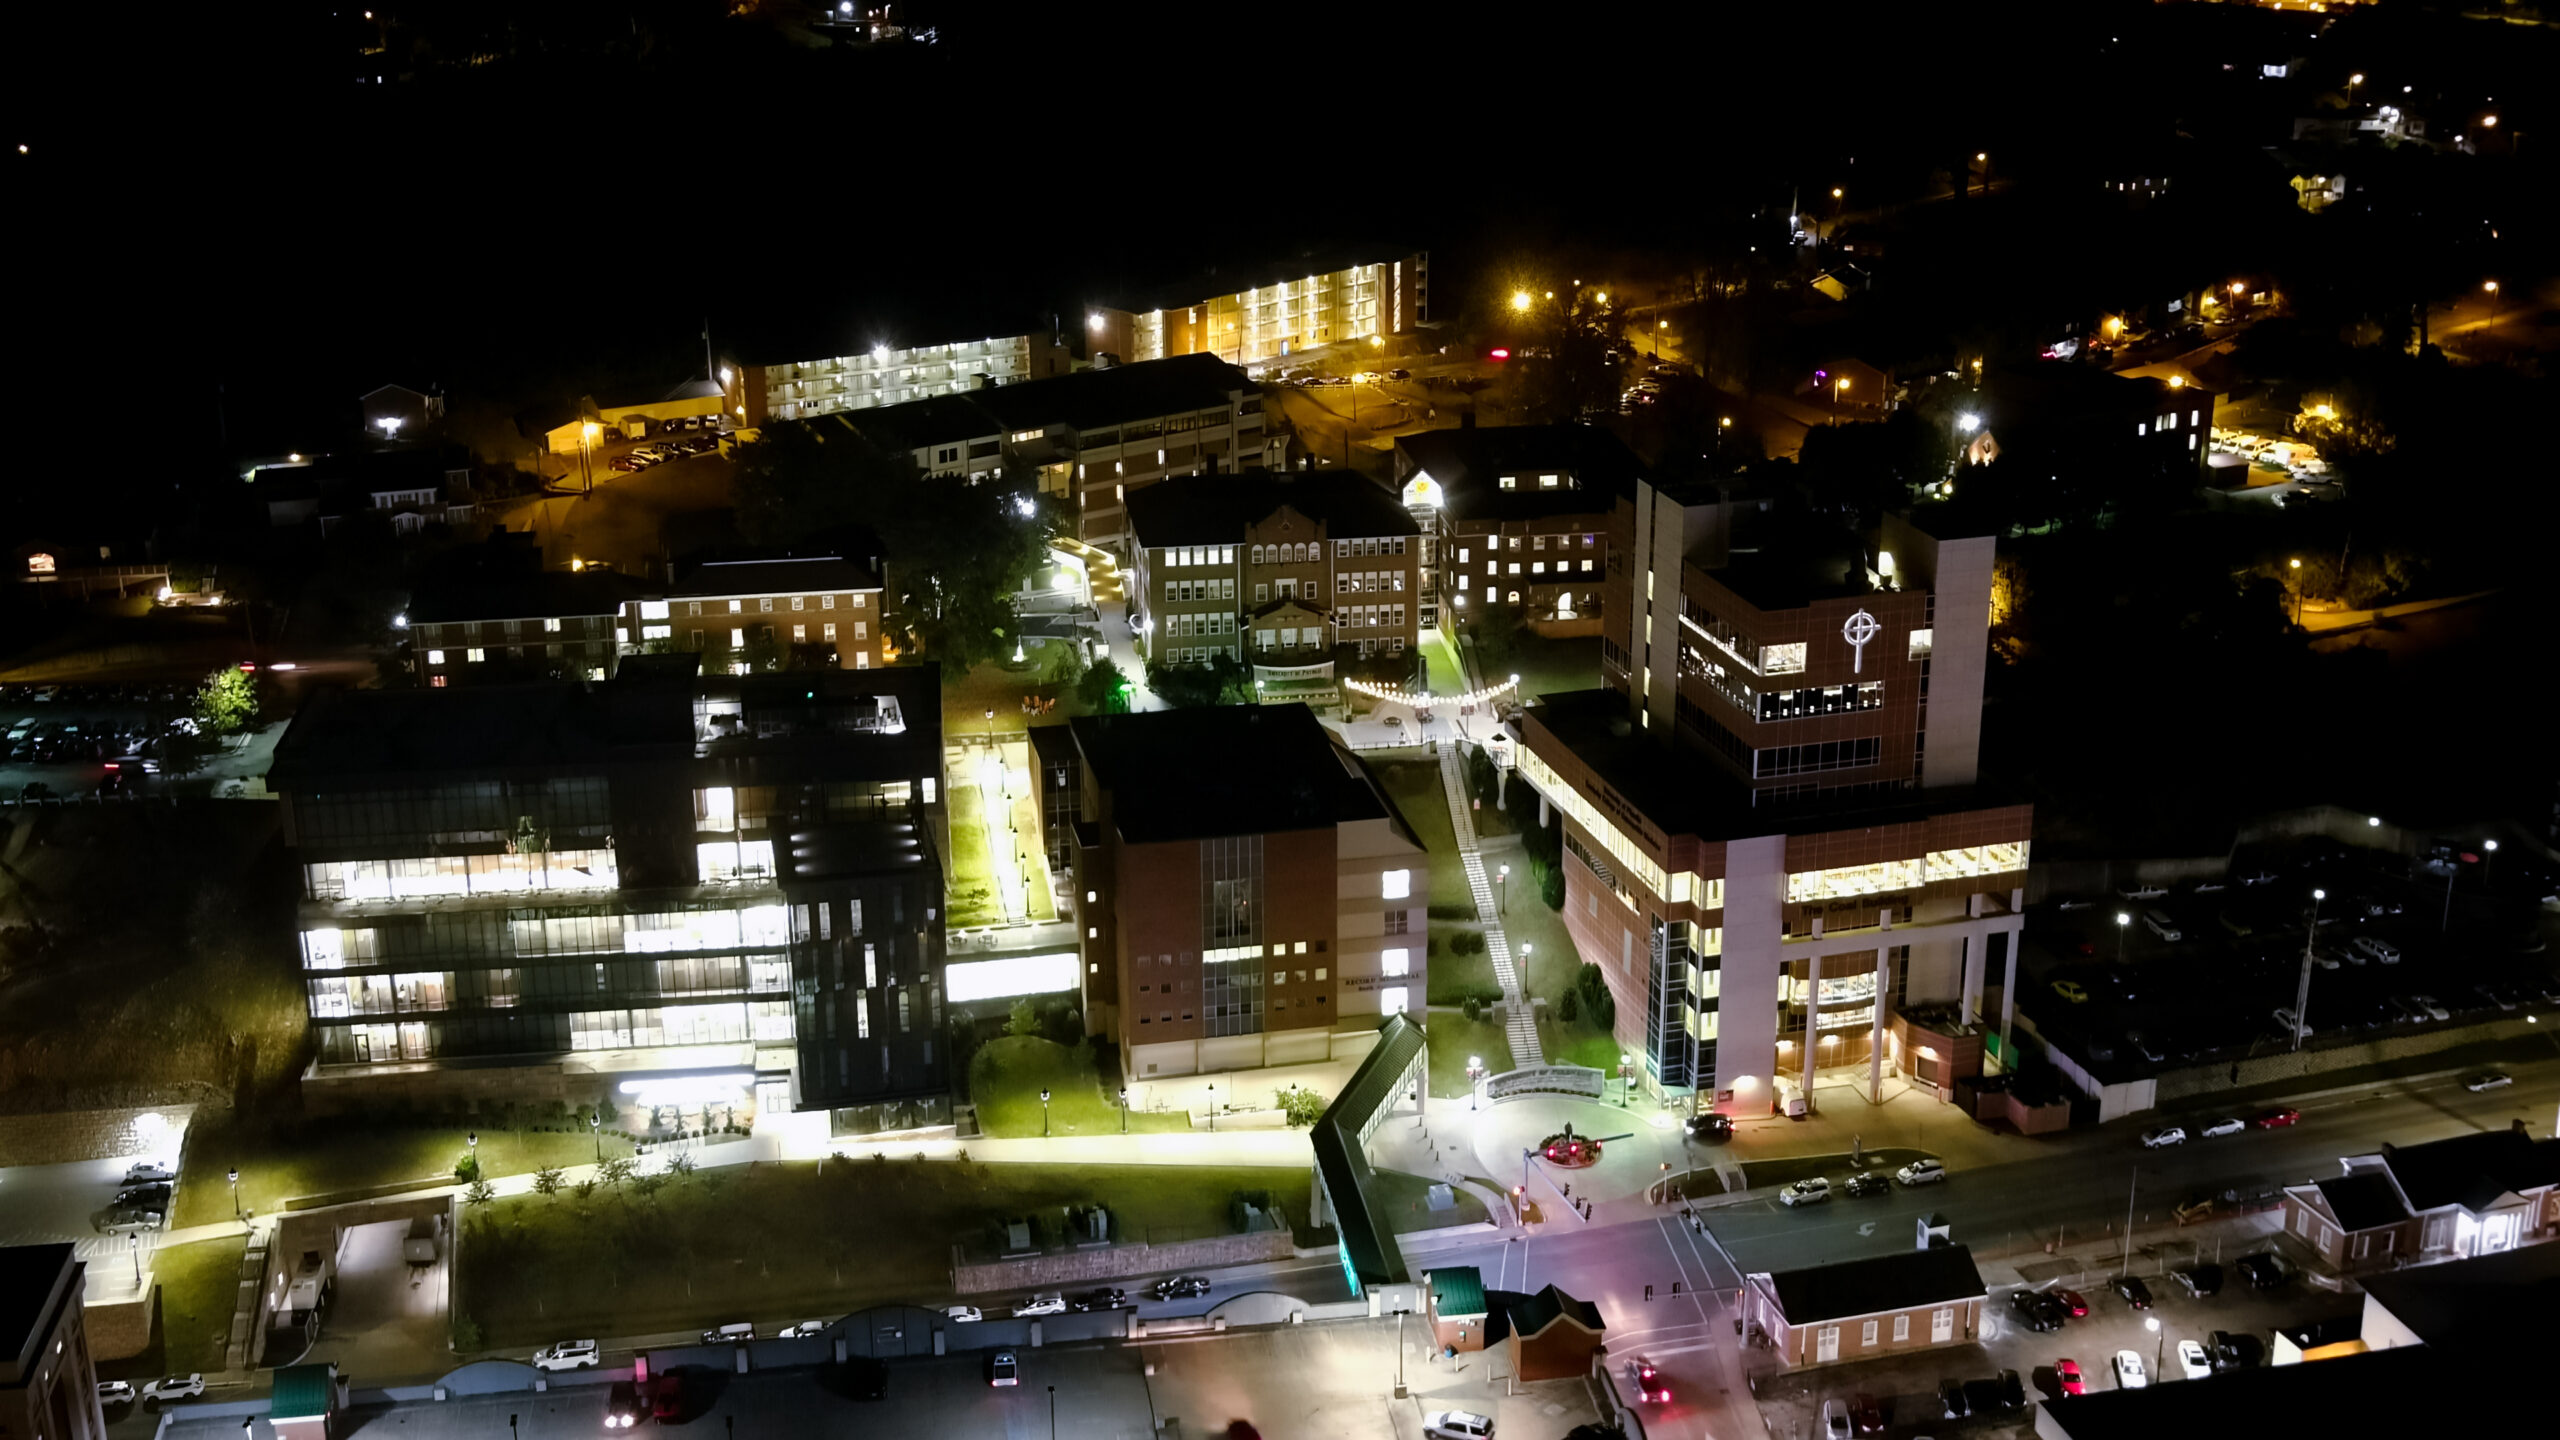 aerial photo of campus at night time